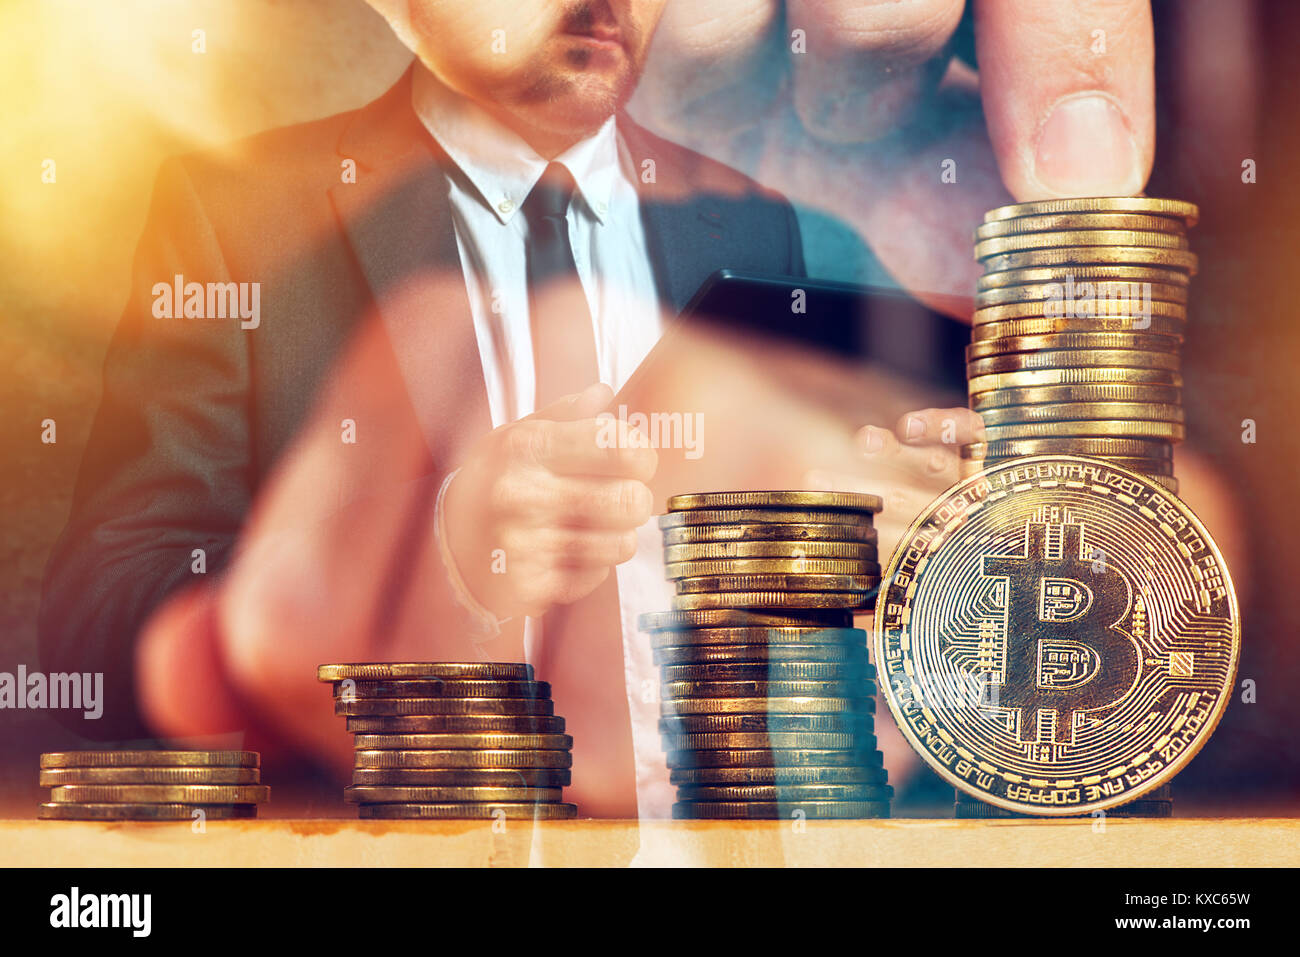 Businessman and Bitcoin cryptocurrency, blockchain technology and decentralized monetary system concept Stock Photo